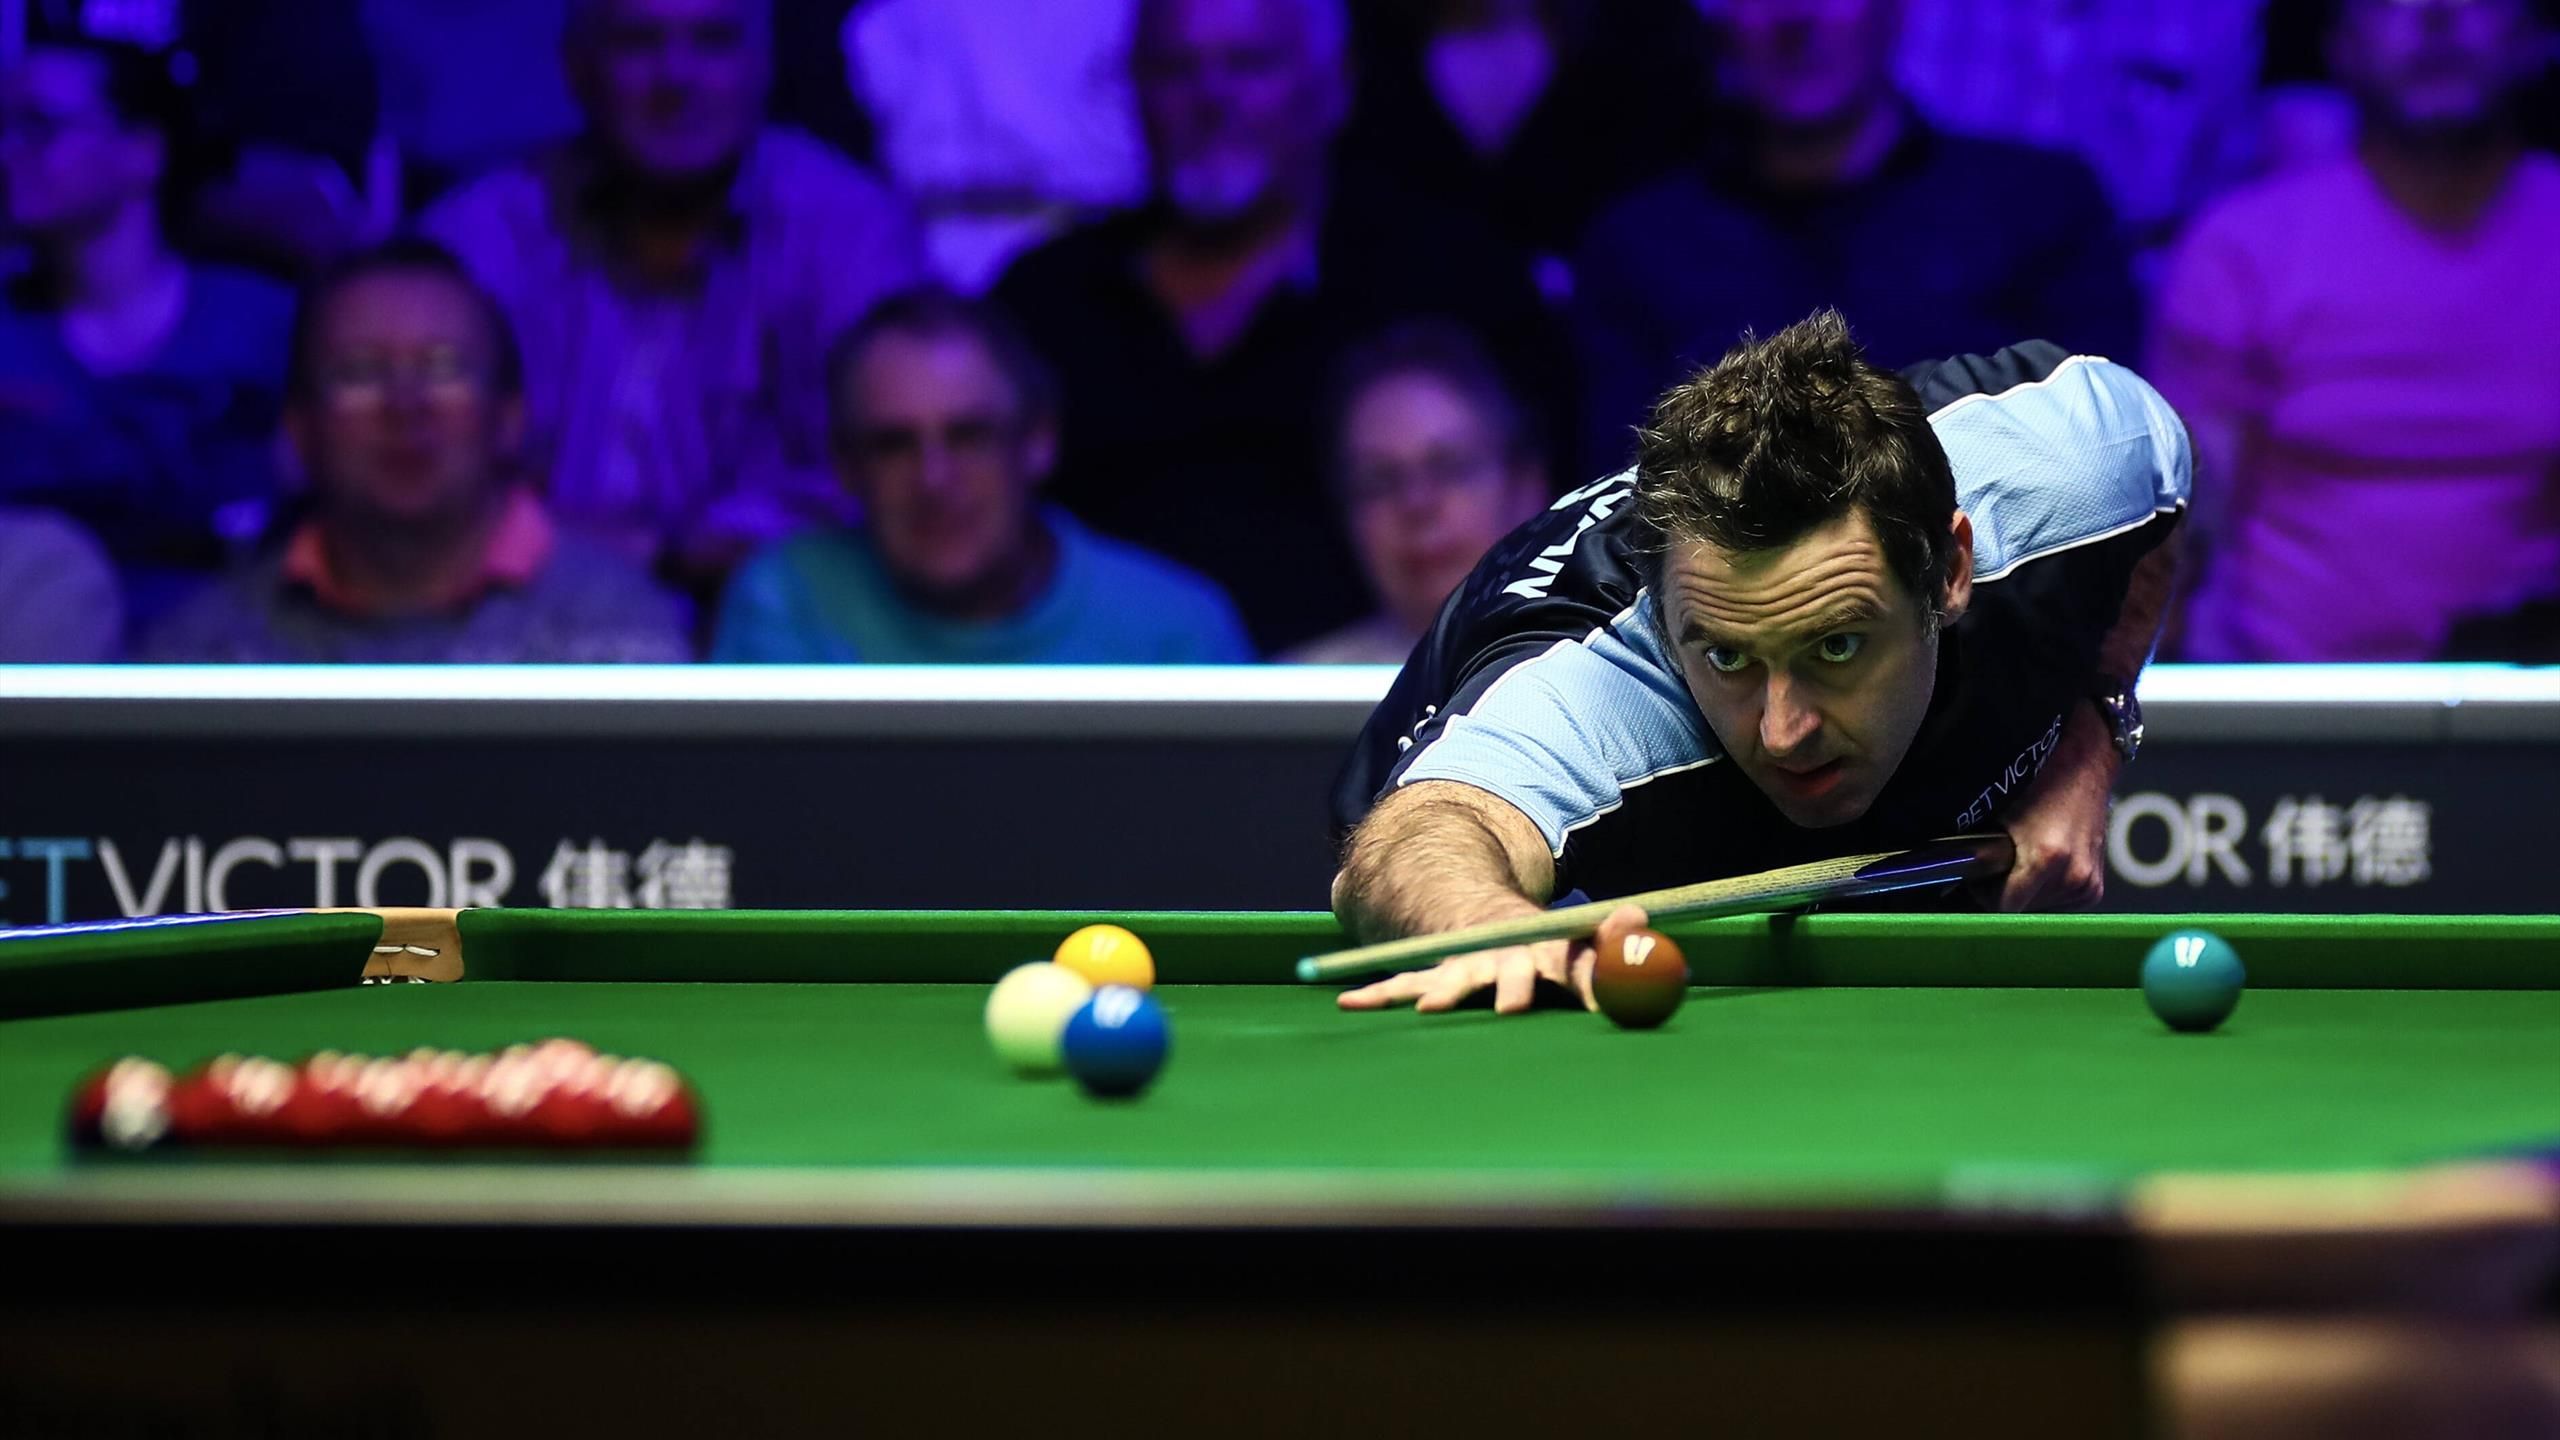 Ronnie OSullivan beats Mark Williams in a classic to book a semi-final place at snookers Tour Championship